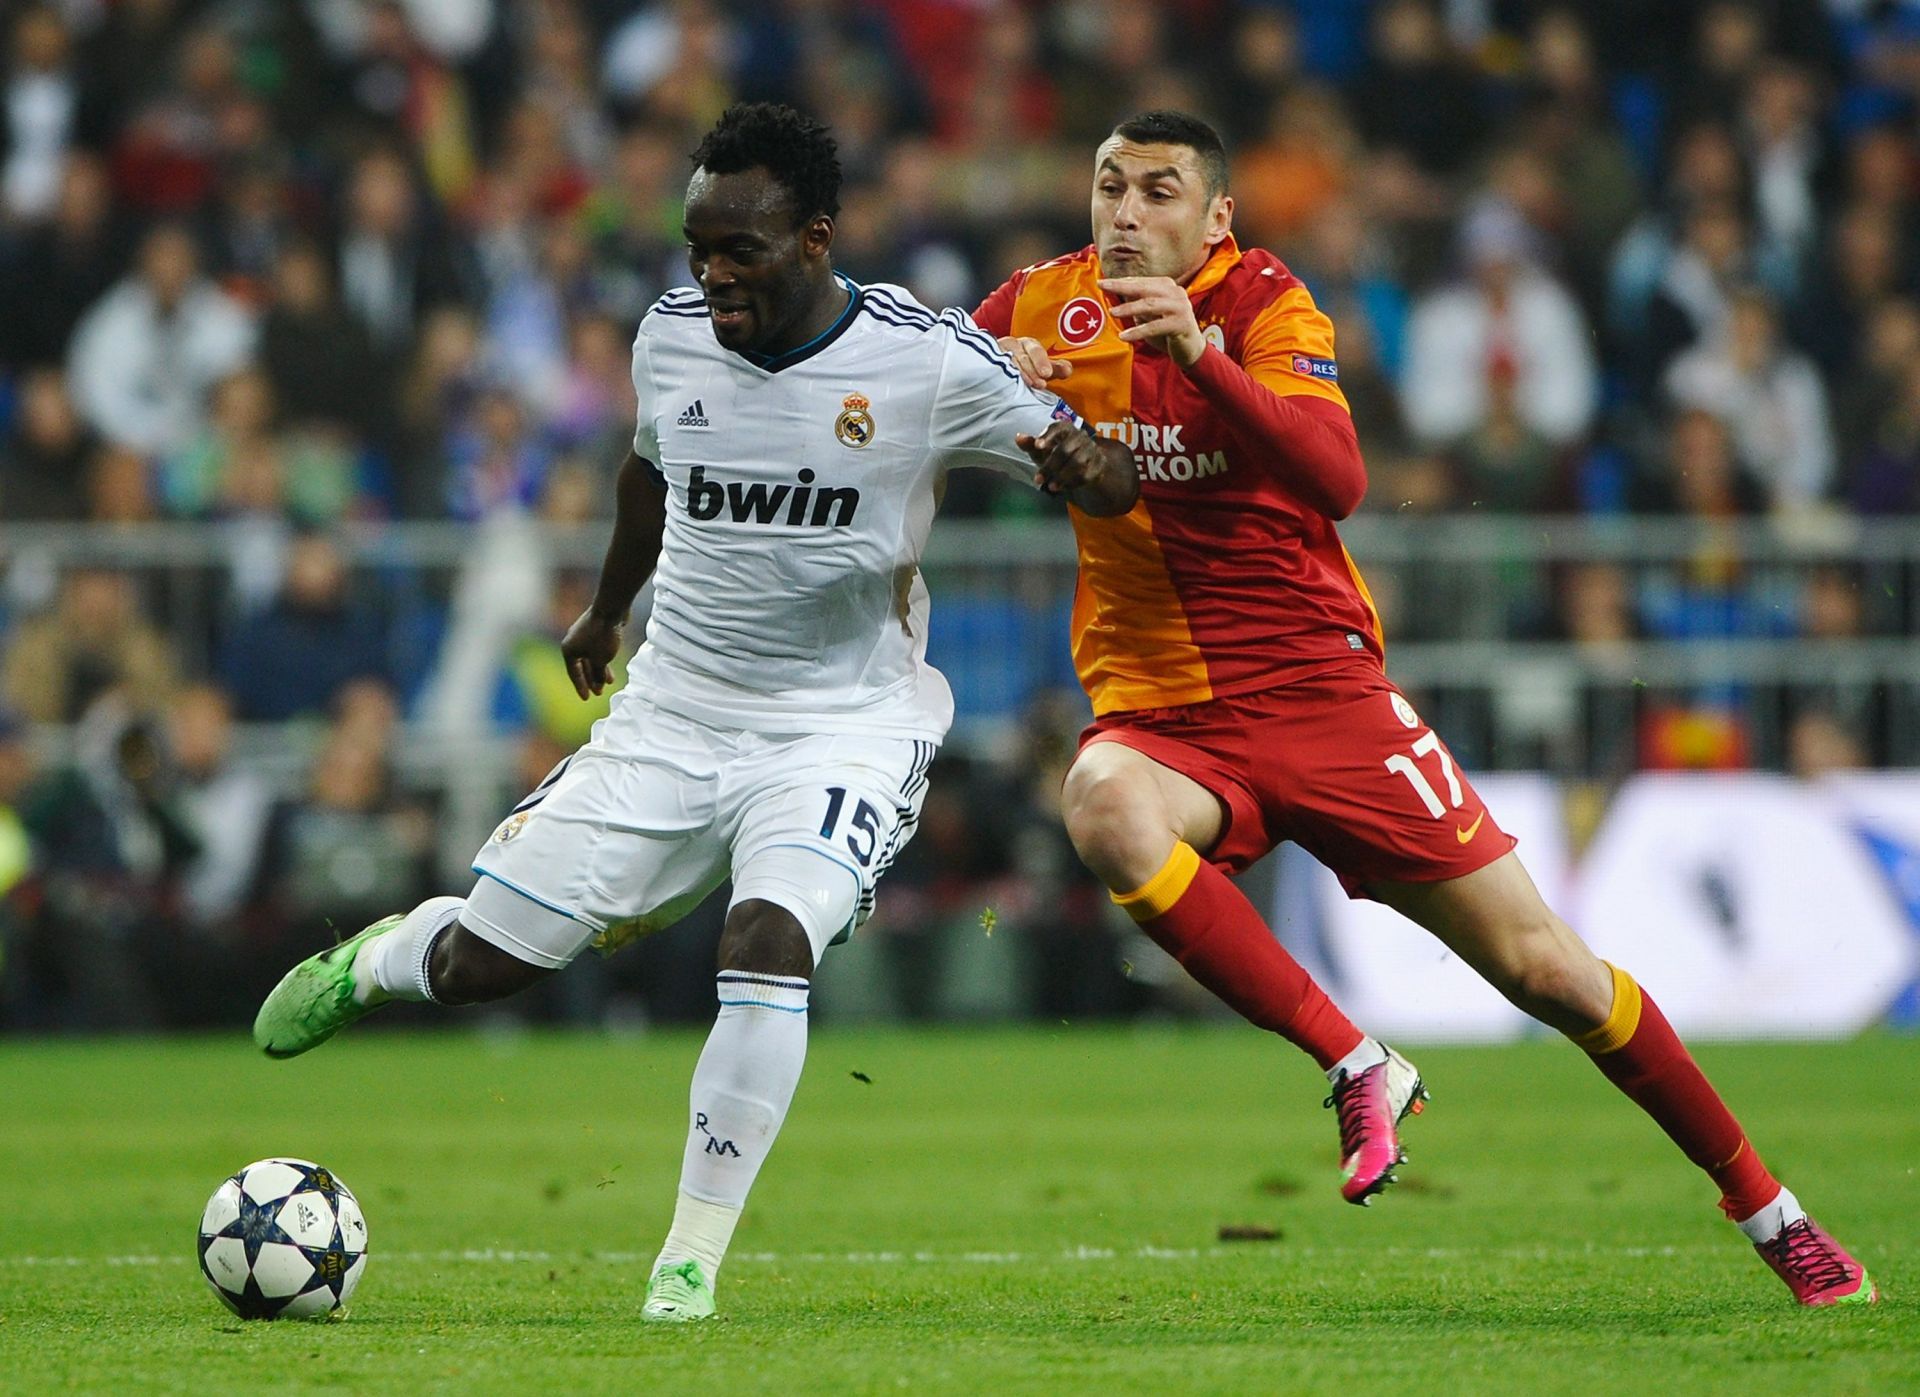 Mcheal Essien in action for Real Madrid in the UEFA Champions League